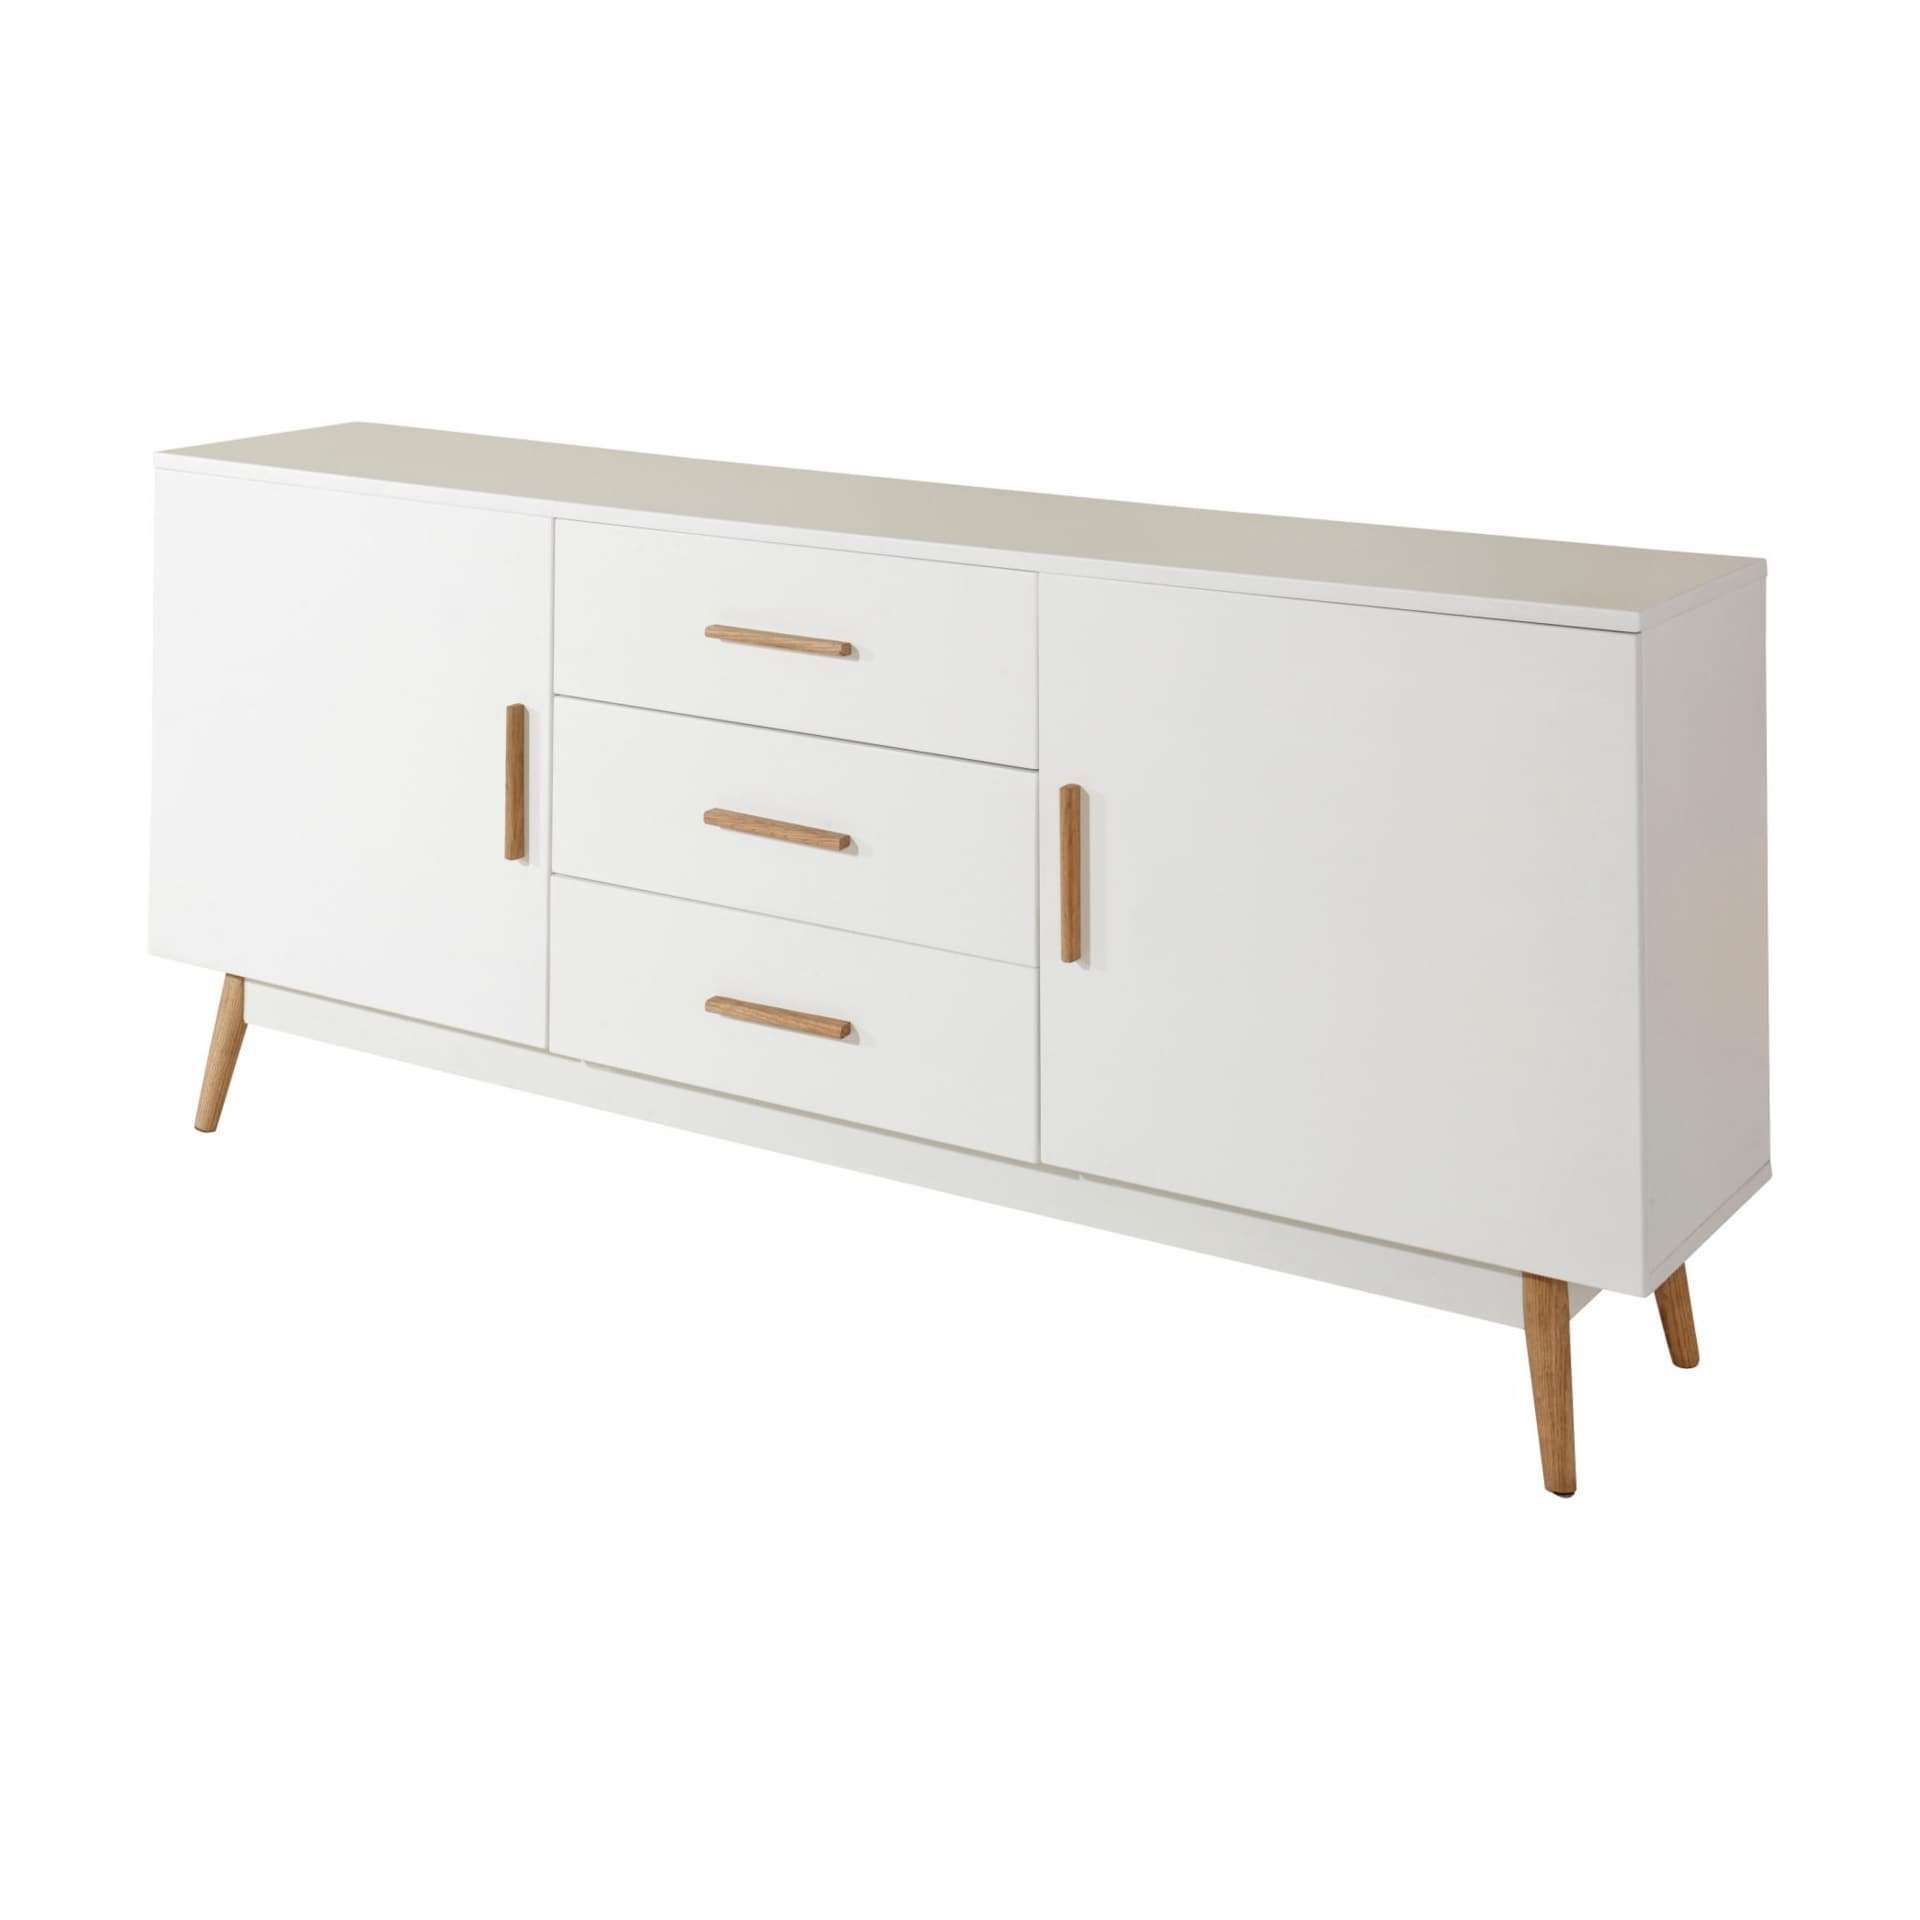 Scandinavian Lifestyle White Texas Sideboard – Free Shipping Today Throughout Overstock Sideboards (View 3 of 20)